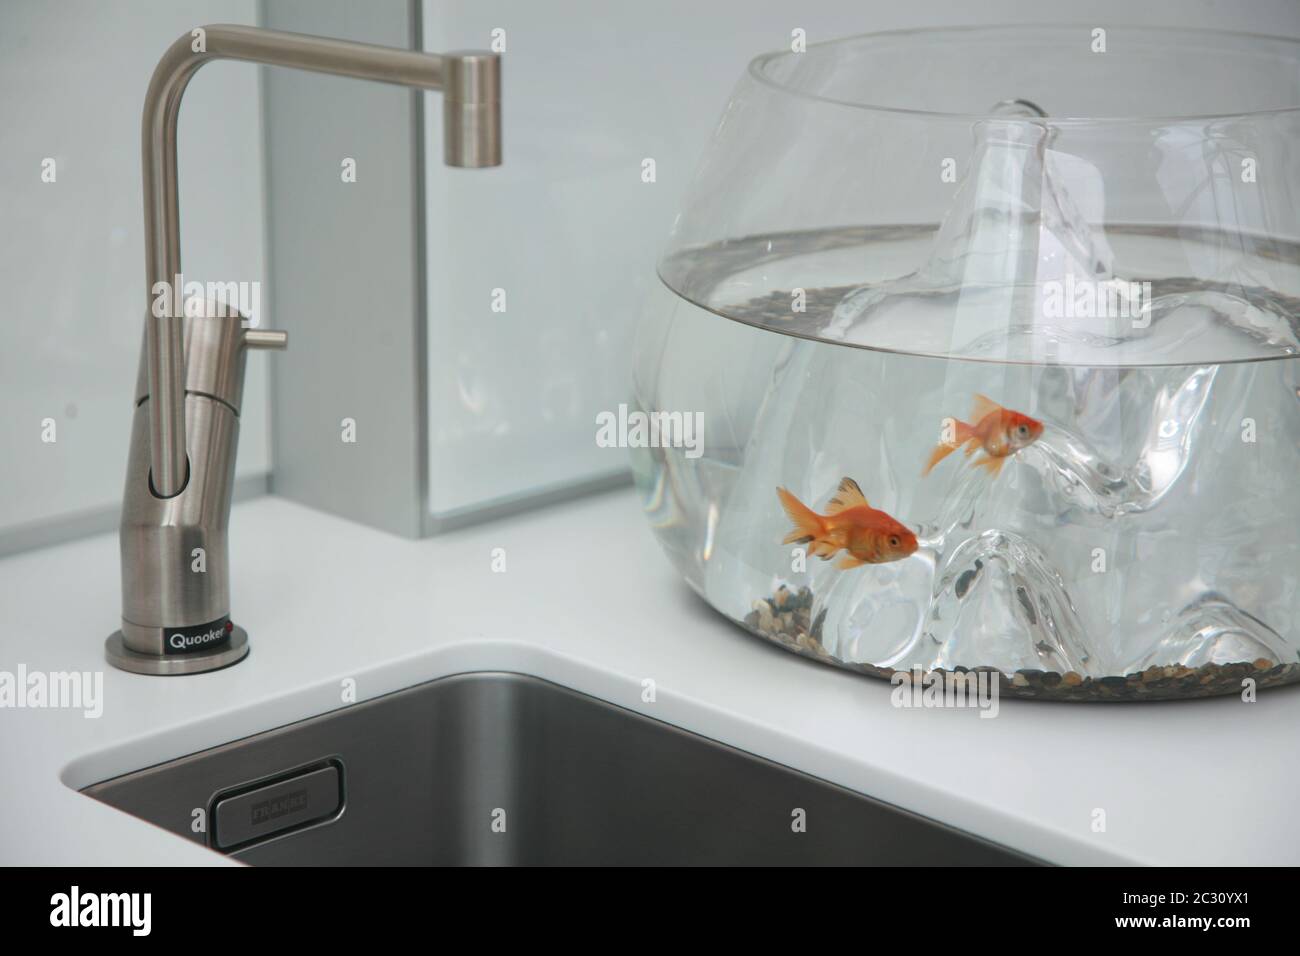 A glass fishbowl with goldfish sits next to a sink with a quooker tap in a  modern kitchen Stock Photo - Alamy